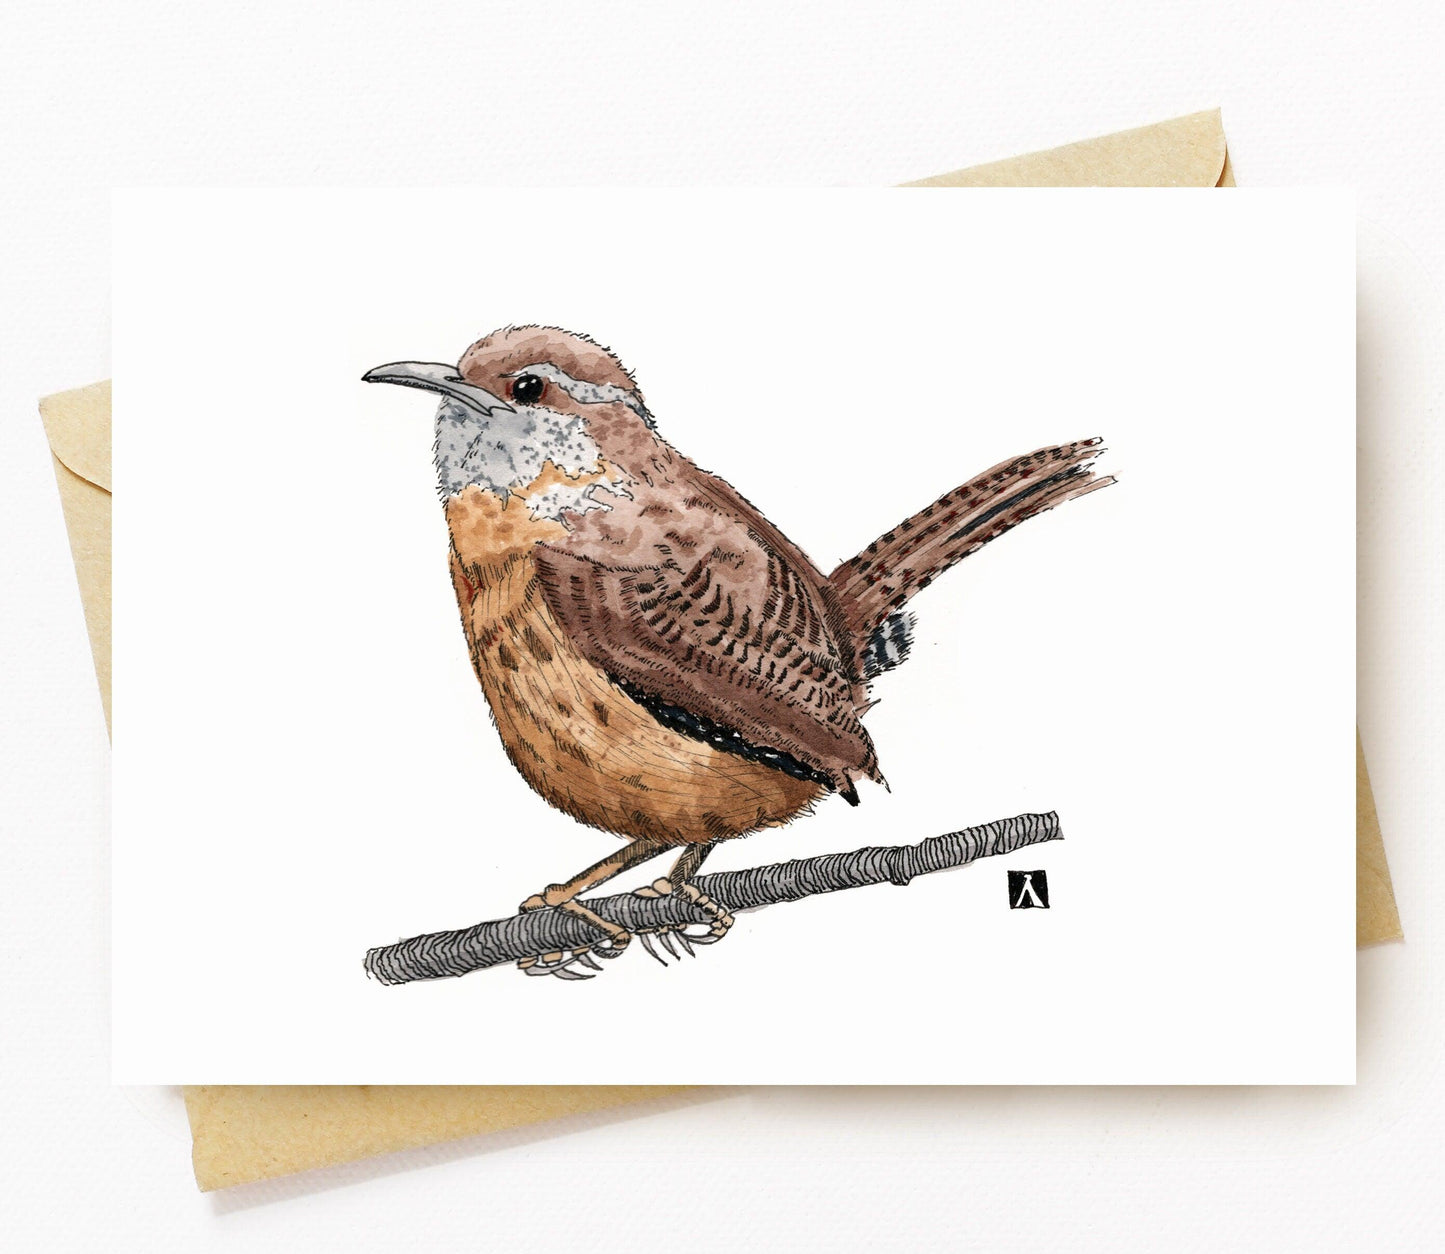 BellavanceInk: Greeting Card With Wren On A Tree Branch Pen & Ink Watercolor Illustration 5 x 7 Inches - BellavanceInk